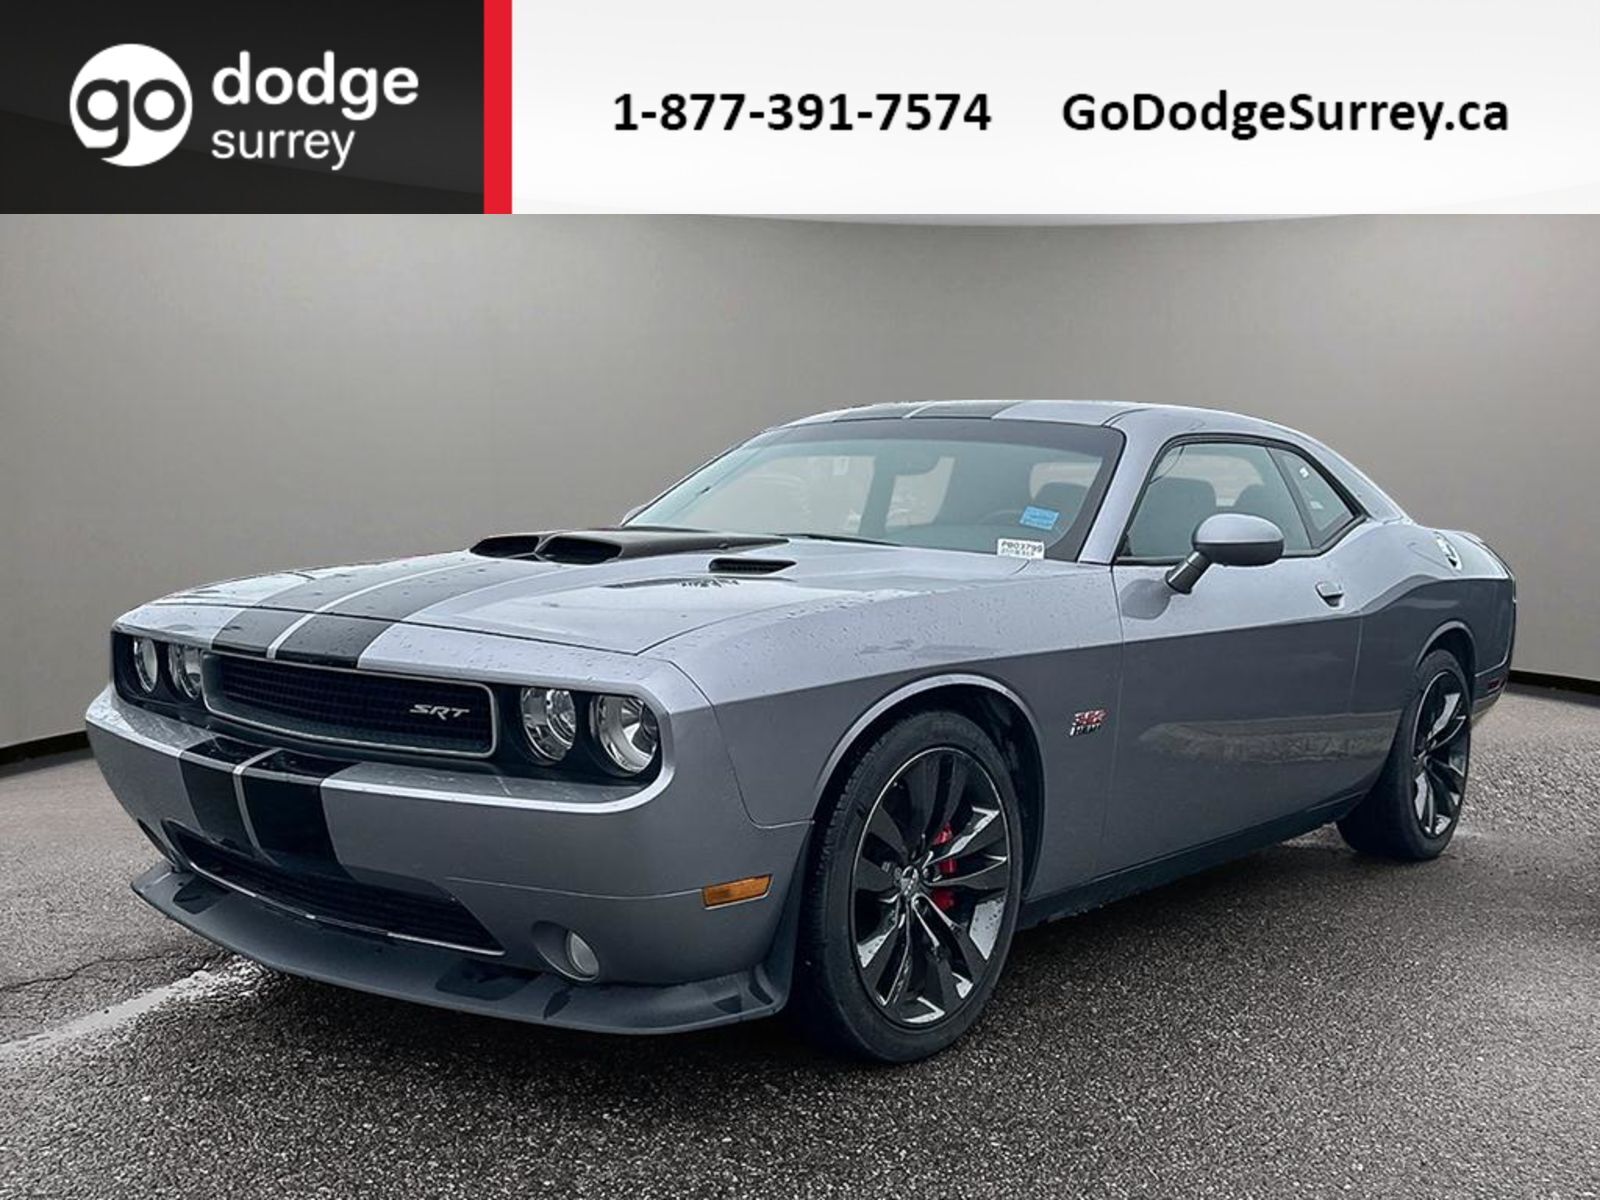 2014 Dodge Challenger SRT8 + LEATHER/NAVI/SUNROOF/HEATED FRONT SEATS/NO 